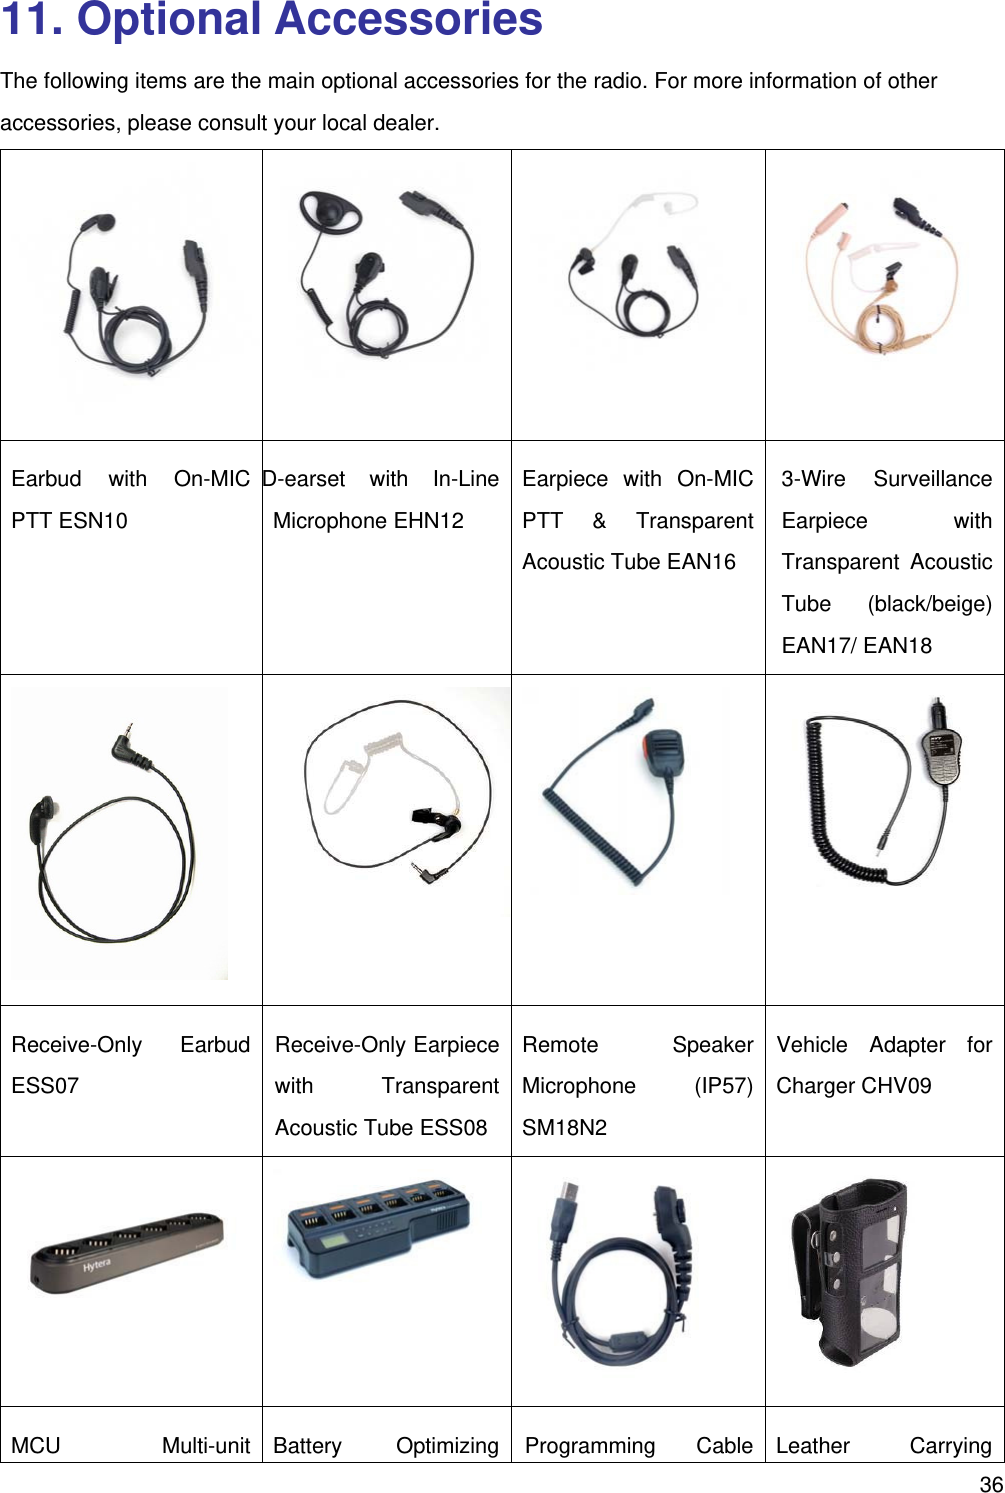   3611. Optional Accessories The following items are the main optional accessories for the radio. For more information of other accessories, please consult your local dealer.   Earbud with On-MIC PTT ESN10   D-earset with In-Line Microphone EHN12 Earpiece with On-MIC PTT &amp; Transparent Acoustic Tube EAN16 3-Wire Surveillance Earpiece with Transparent Acoustic Tube (black/beige) EAN17/ EAN18    Receive-Only Earbud ESS07  Receive-Only Earpiece with Transparent Acoustic Tube ESS08 Remote Speaker Microphone (IP57) SM18N2  Vehicle Adapter for Charger CHV09     MCU  Multi-unit Battery  Optimizing Programming  Cable Leather  Carrying 